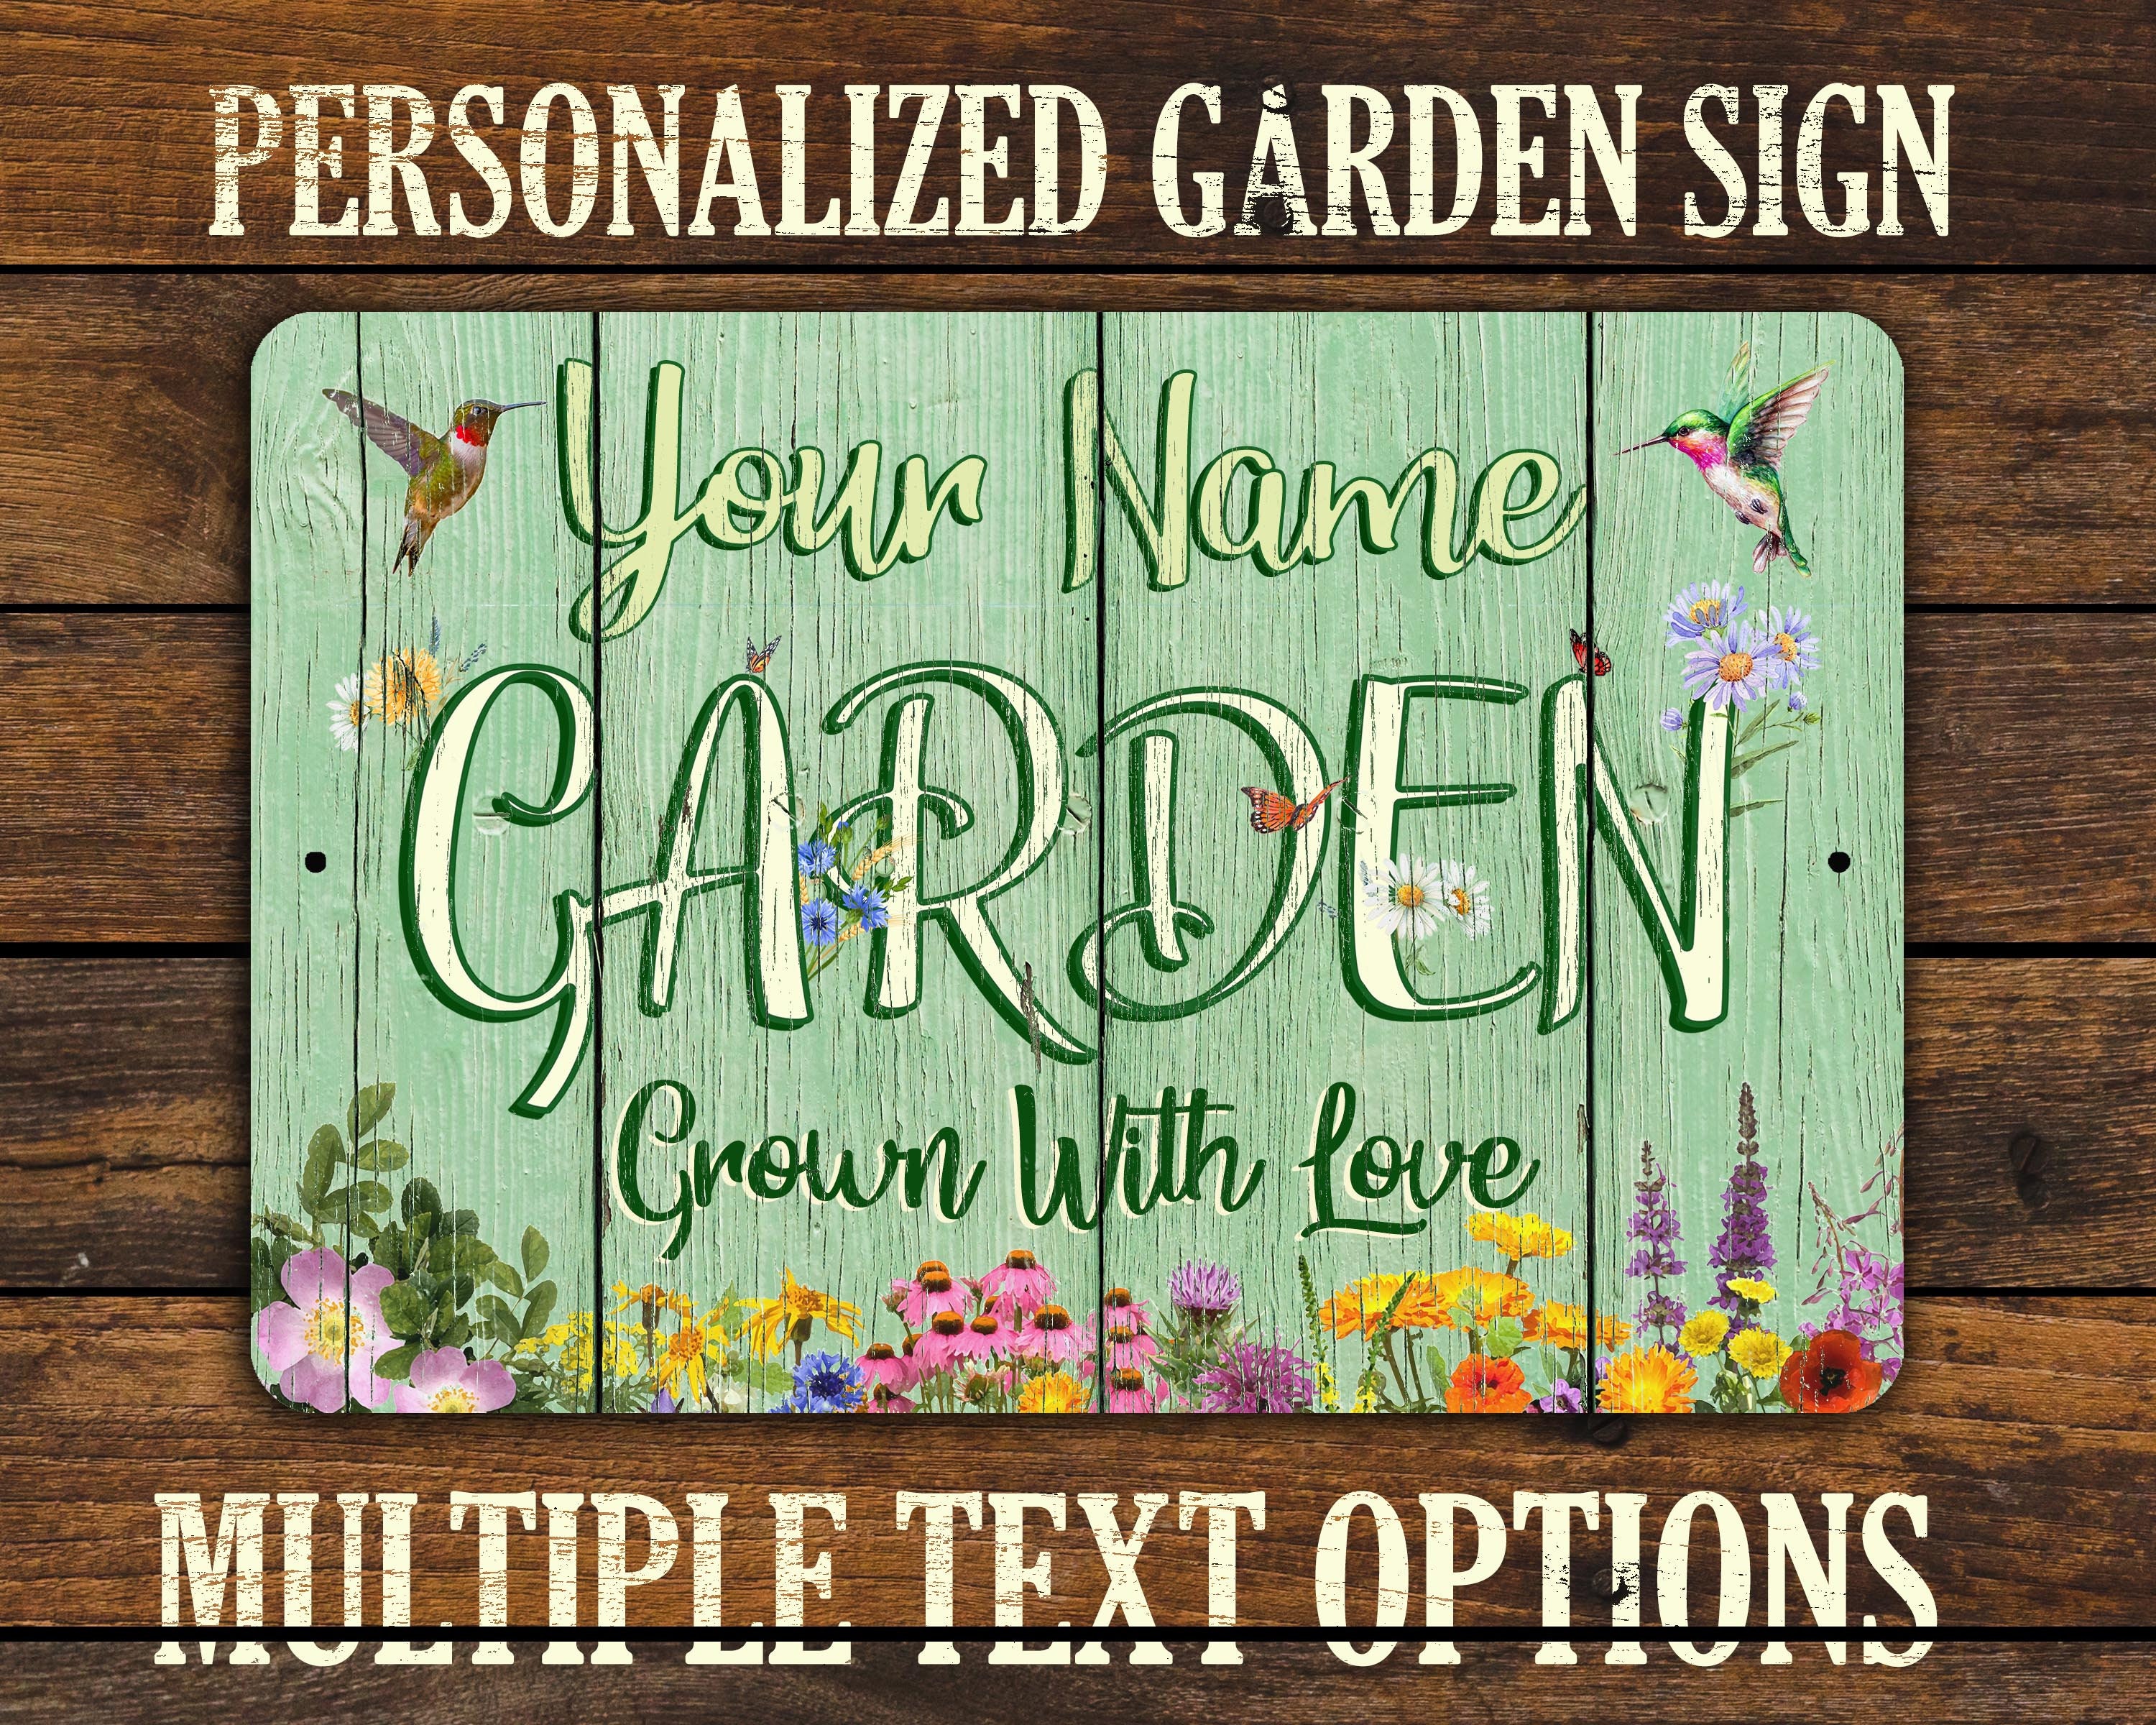 Yard Art Personalized Sign Welcome Marker 3 Small Planks on 1 Stake Your Name Here Grown With Love Custom Marker Custom Garden Sign Family Sign 